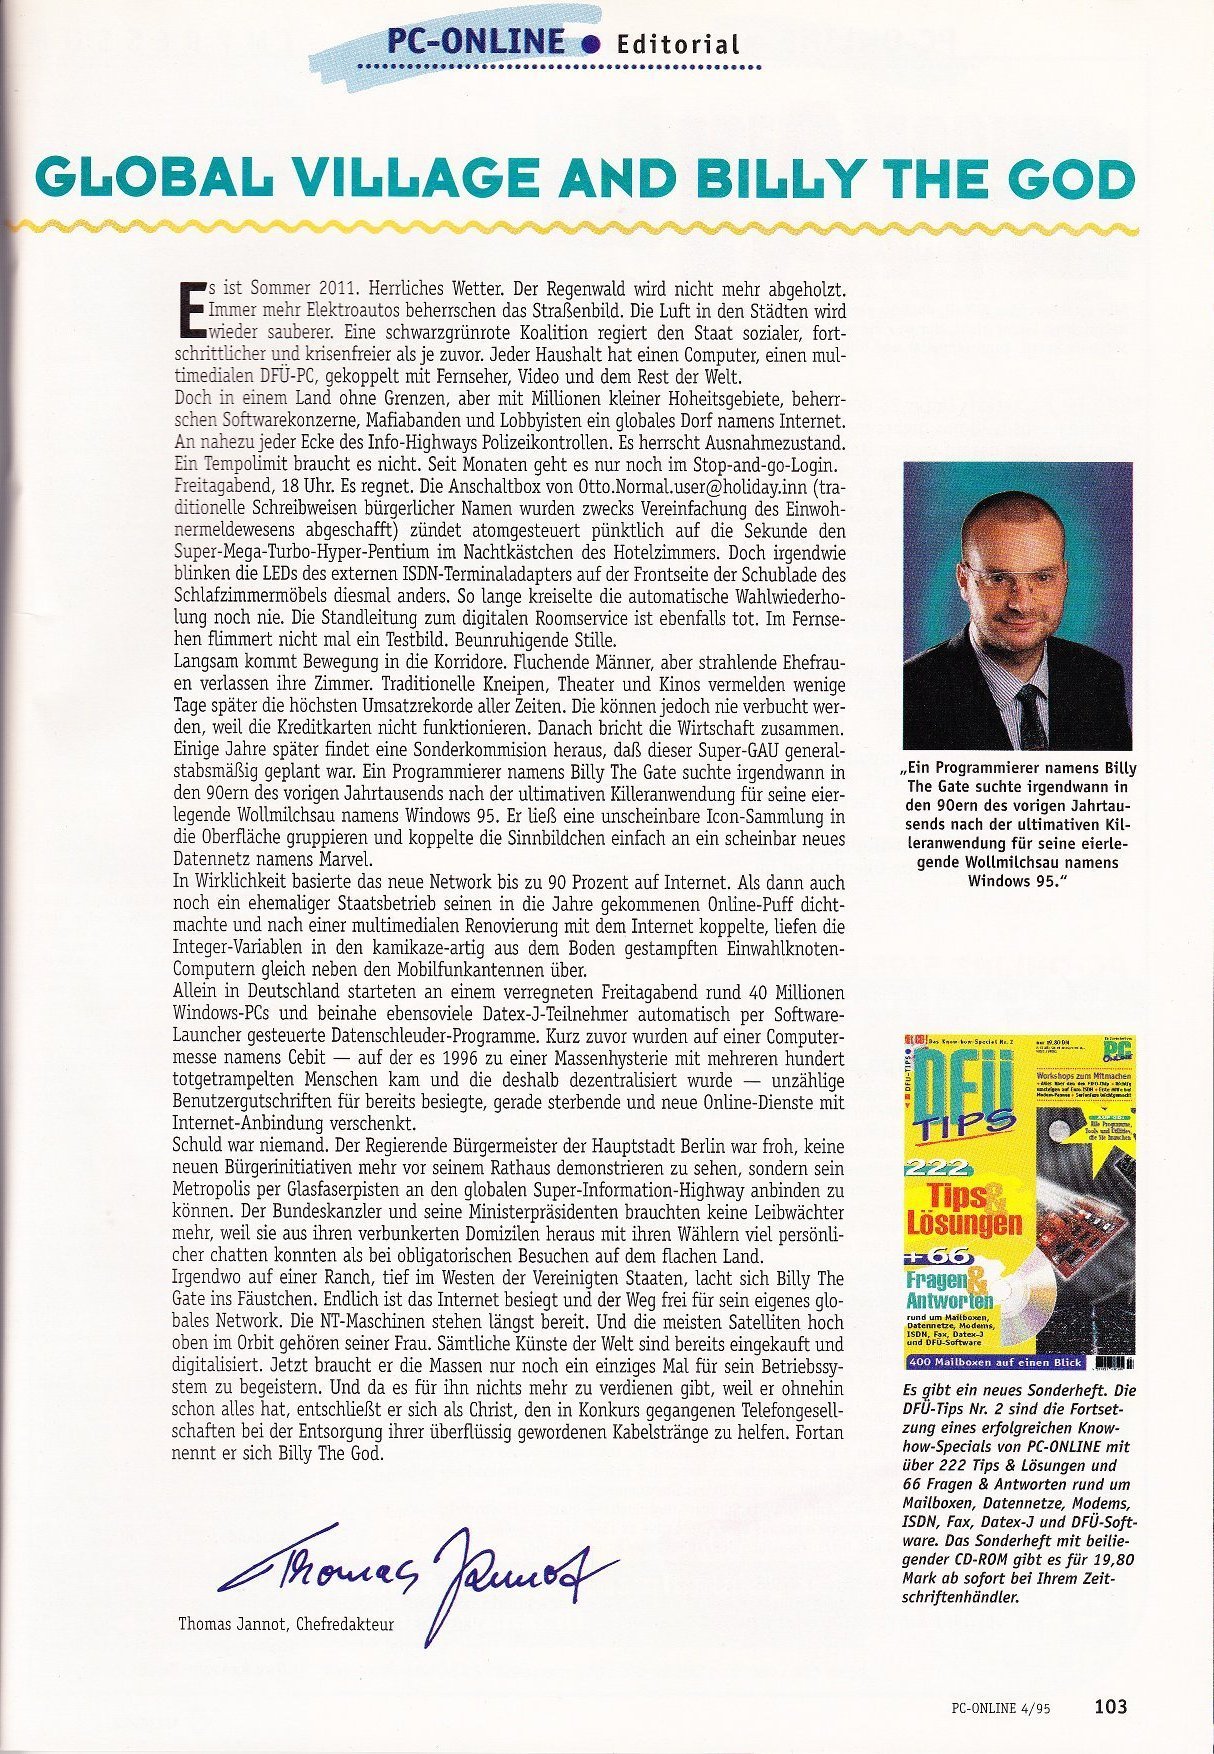 Thomas Jannot in PC-ONLiNE 1995-04